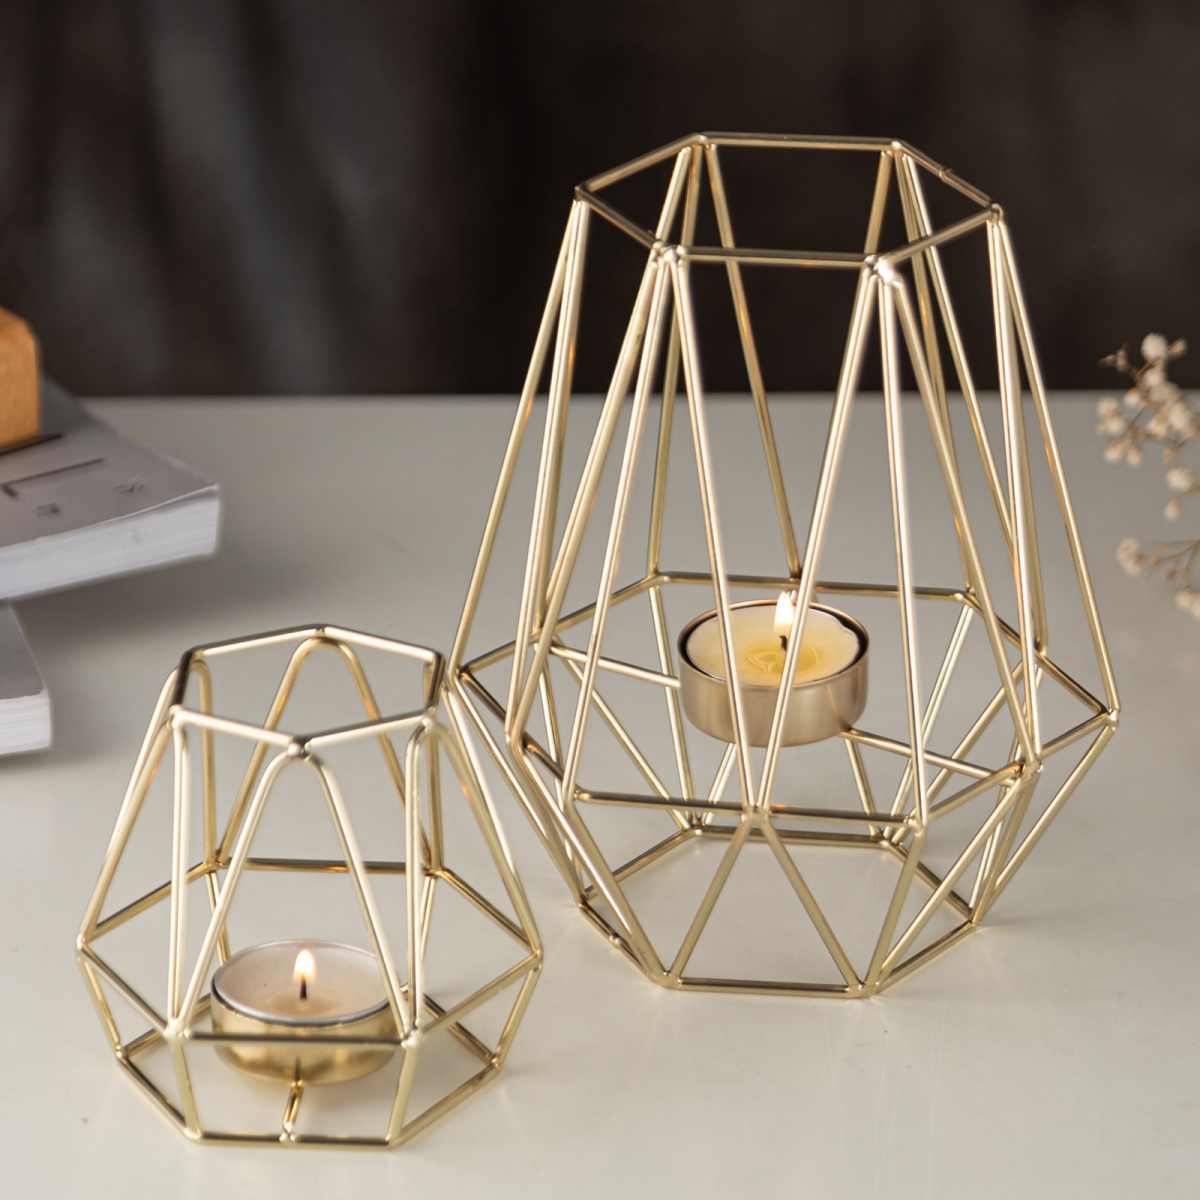 Metal candle holders, geometric metal candle holder-GOON- Home Decoration, Christmas Decoration, Halloween Decor, Harvest Decor, Easter Decor, Thanksgiving Day Decor, Party Decor